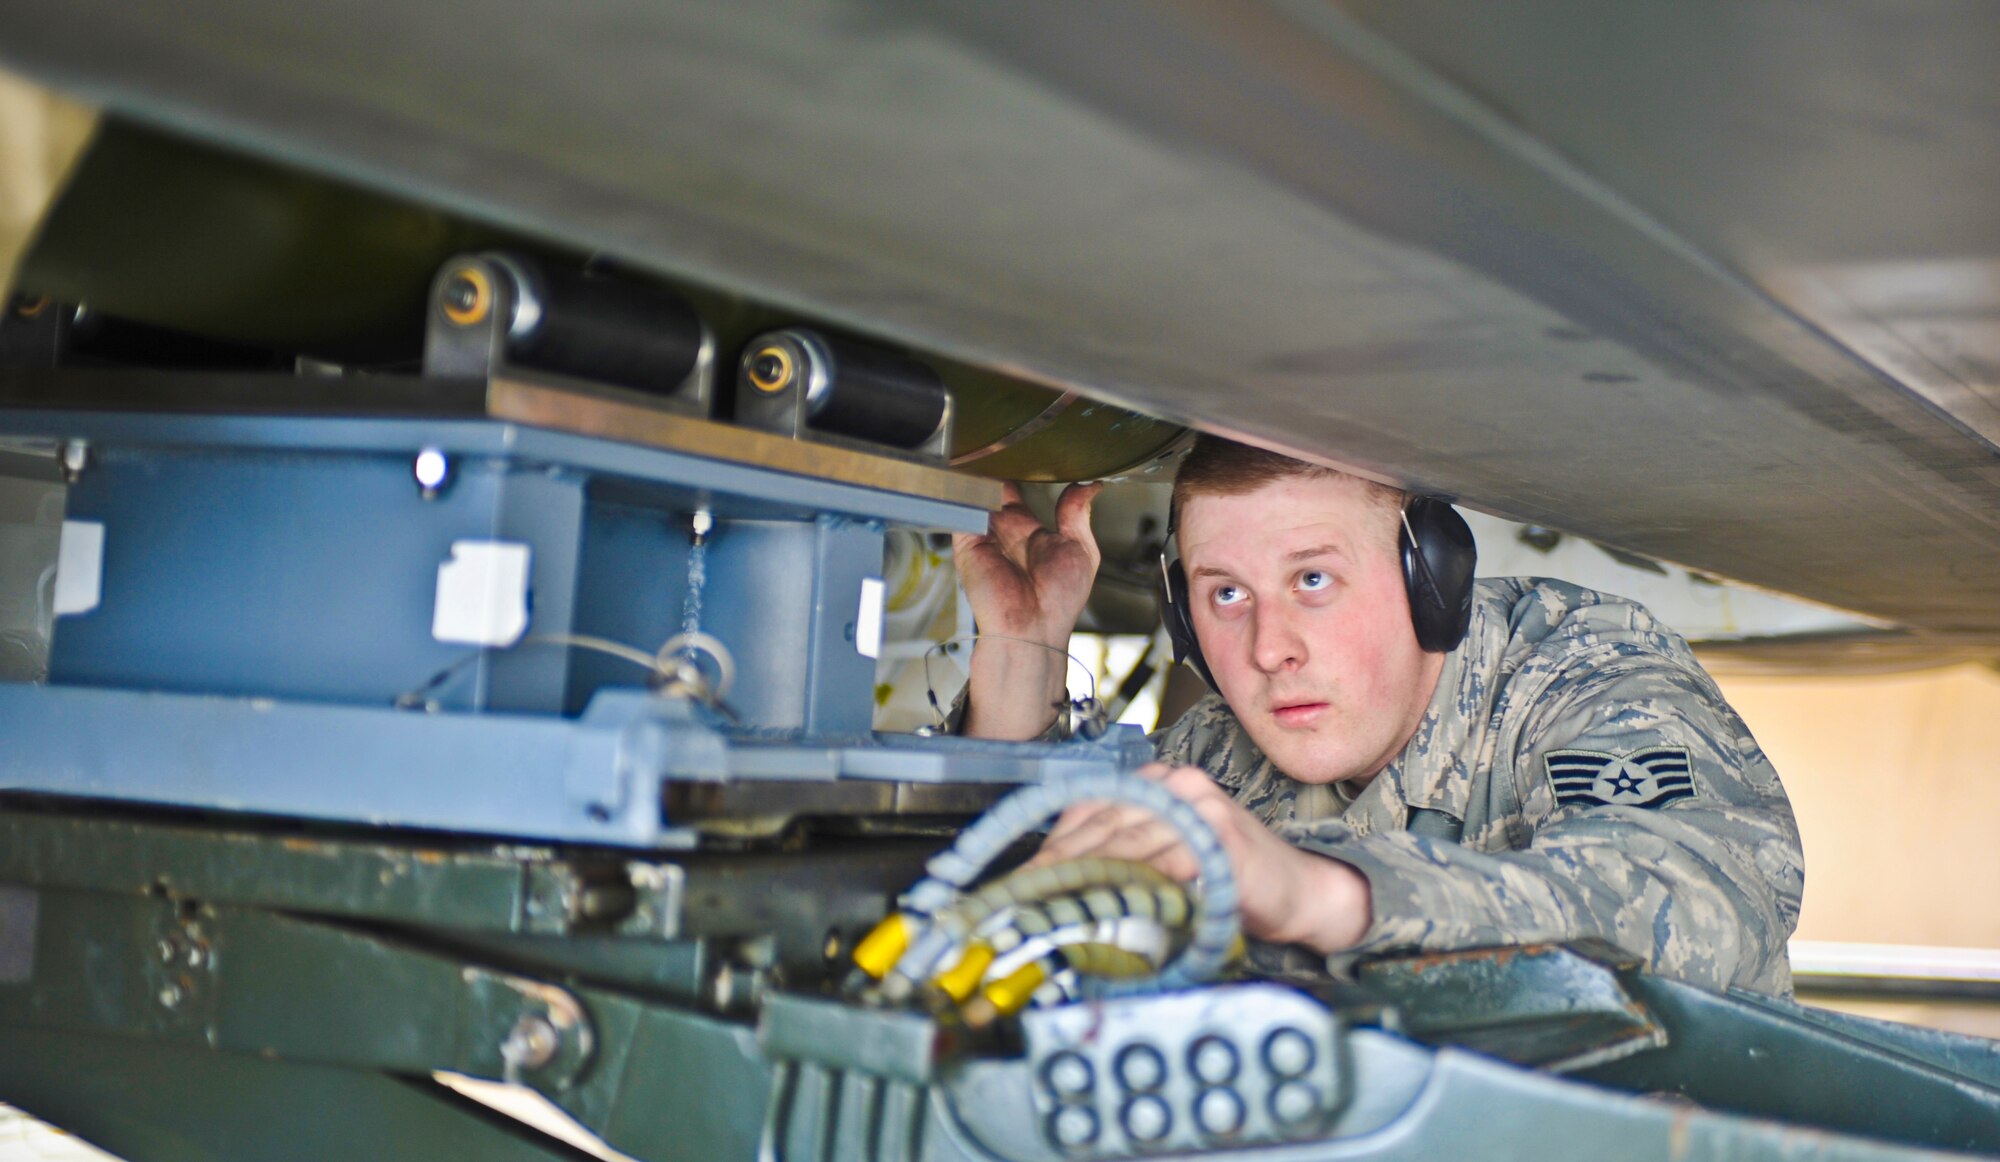 ELMENDORF AIR FORCE BASE, Alaska -- Staff Sgt. Jason Leighton, 90th Aircraft Maintenance Unit, examines a bomb being loaded onto a F-22 during a load crew inspection March 11, 2009. Leighton is a 2009 Lt. Gen. Leo Marquez Award winner in the Munitions/Missile Technician Supervisor Category. The Marquez Award is one of the hightest honors for a maintainer at Air Force level. (U.S. Air Force photo/Senior Airman Matthew Owens)